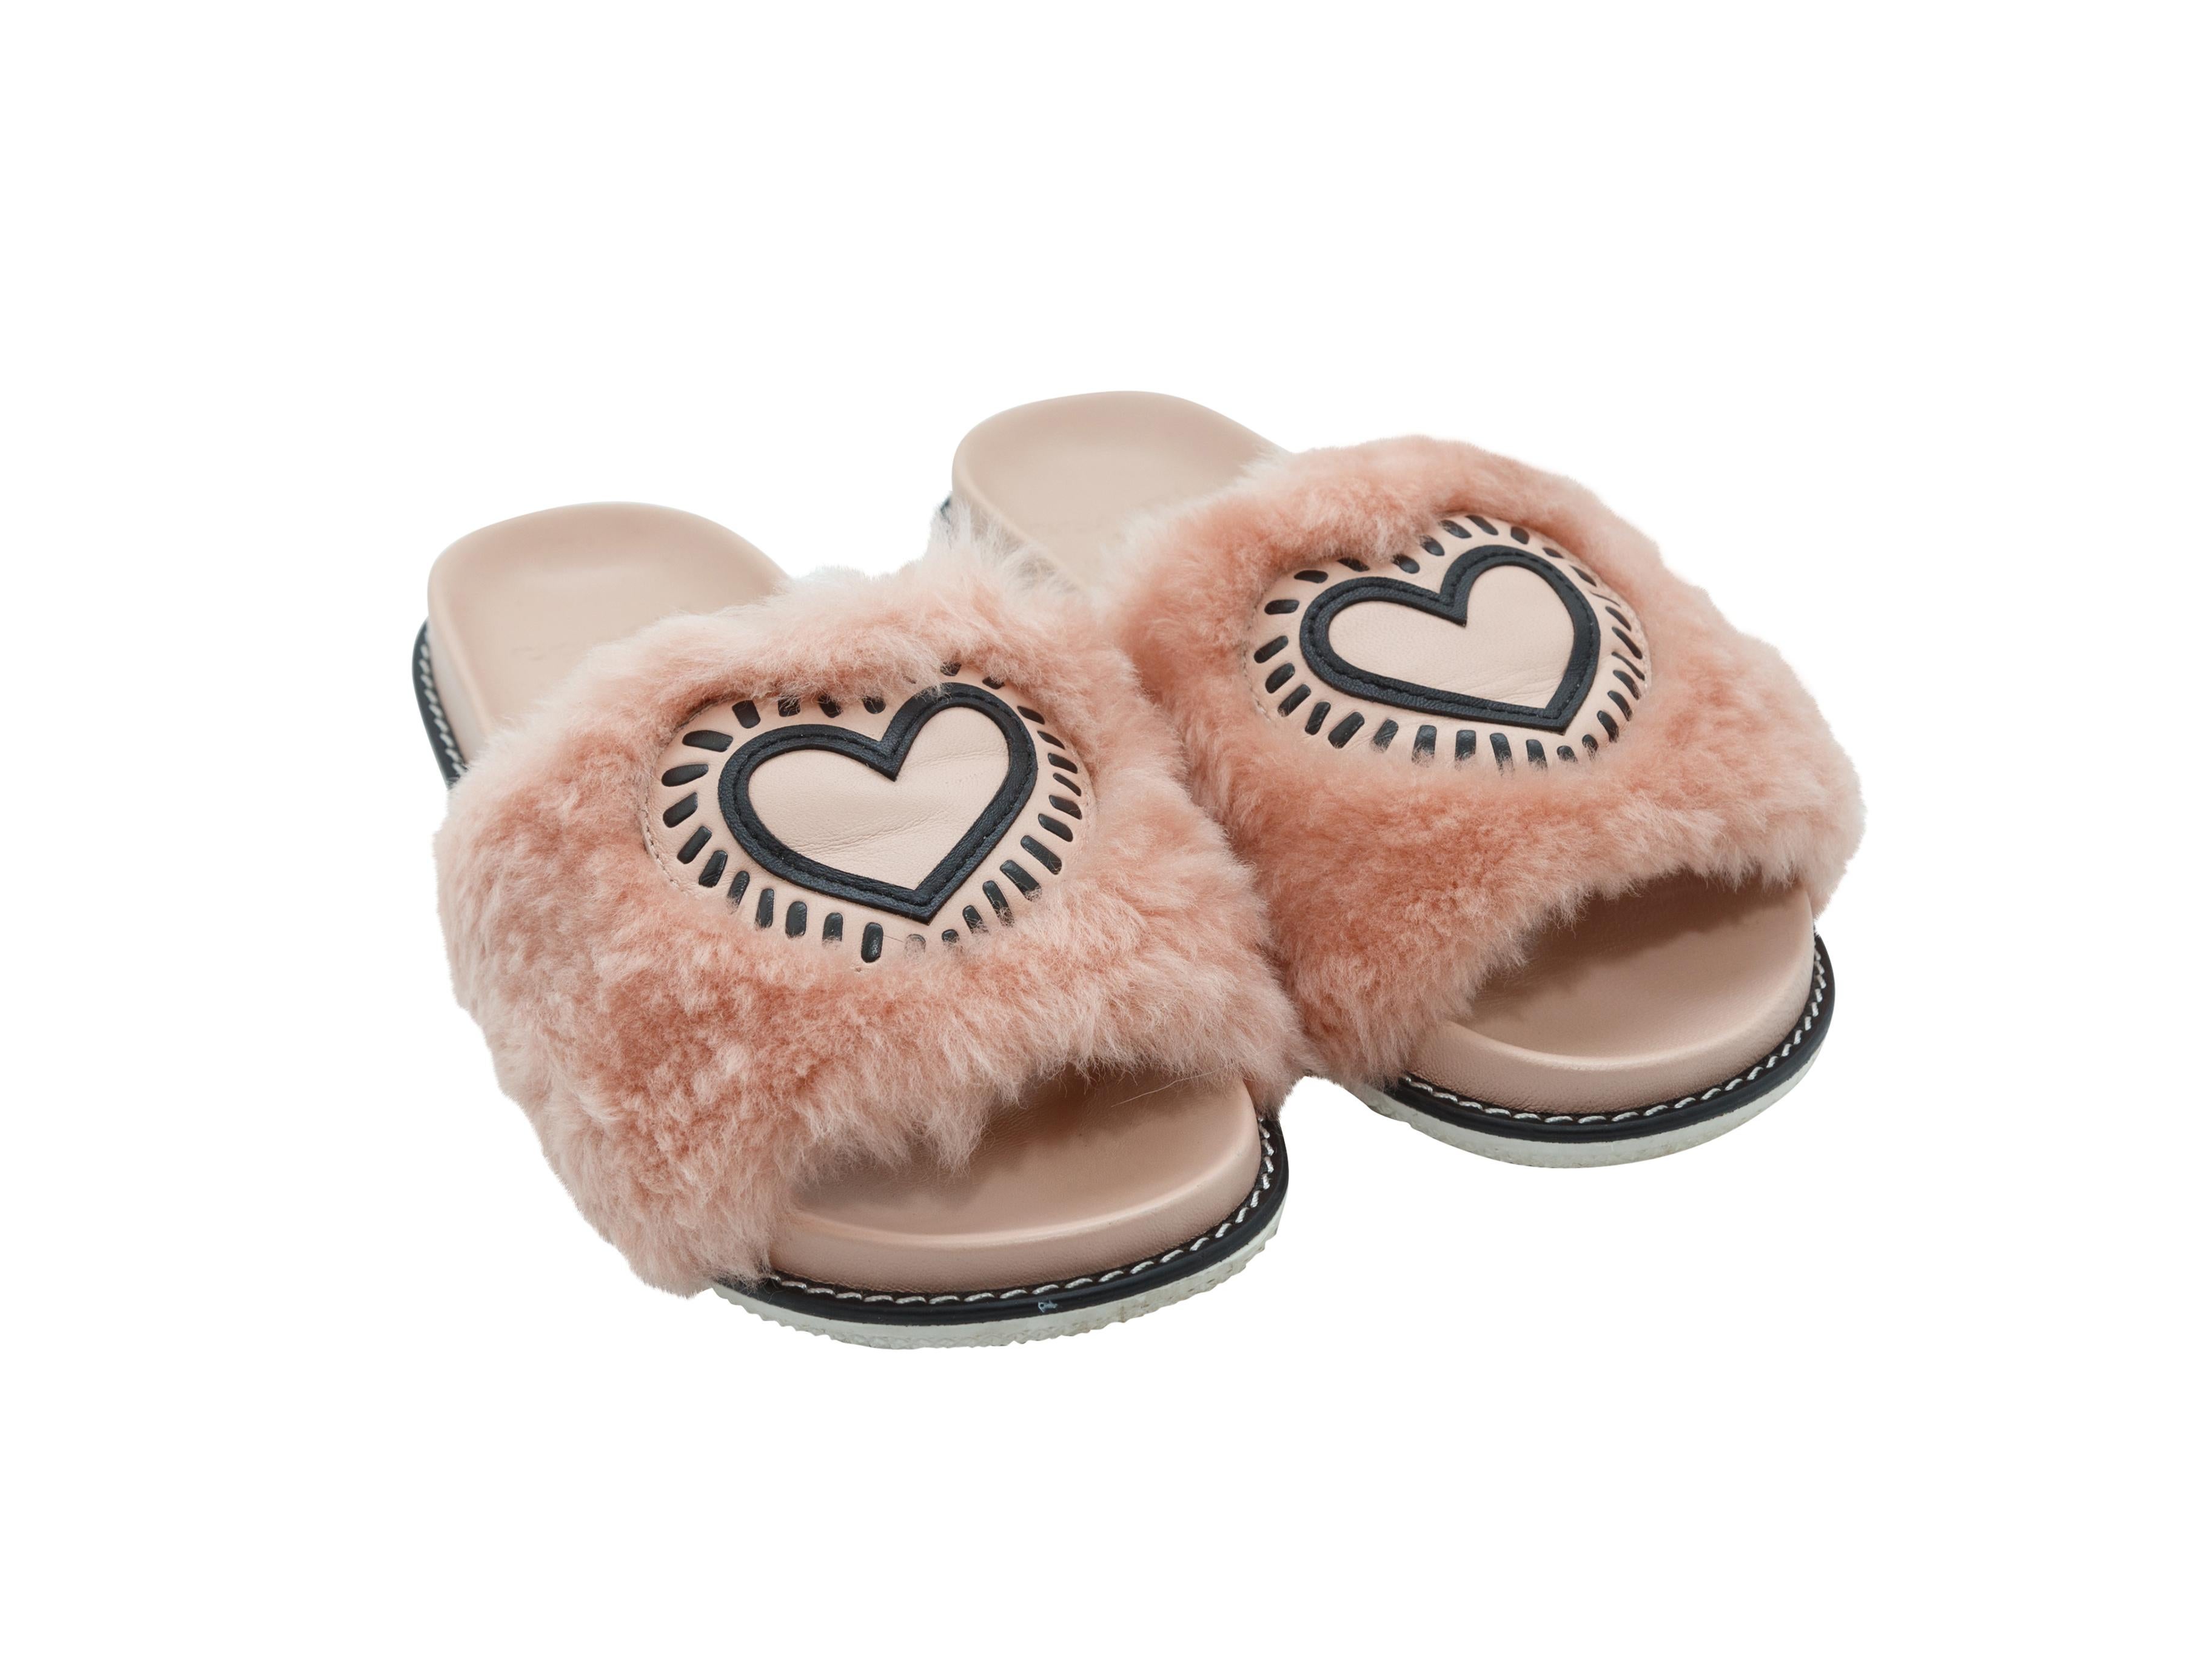 Product details: Pink fur slides by Coach x Keith Haring. Slip-on style. Heart detailing at tops.
Condition: Pre-owned. Good. Some signs of wear at soles. Includes box.
Est. Retail $ 195.00